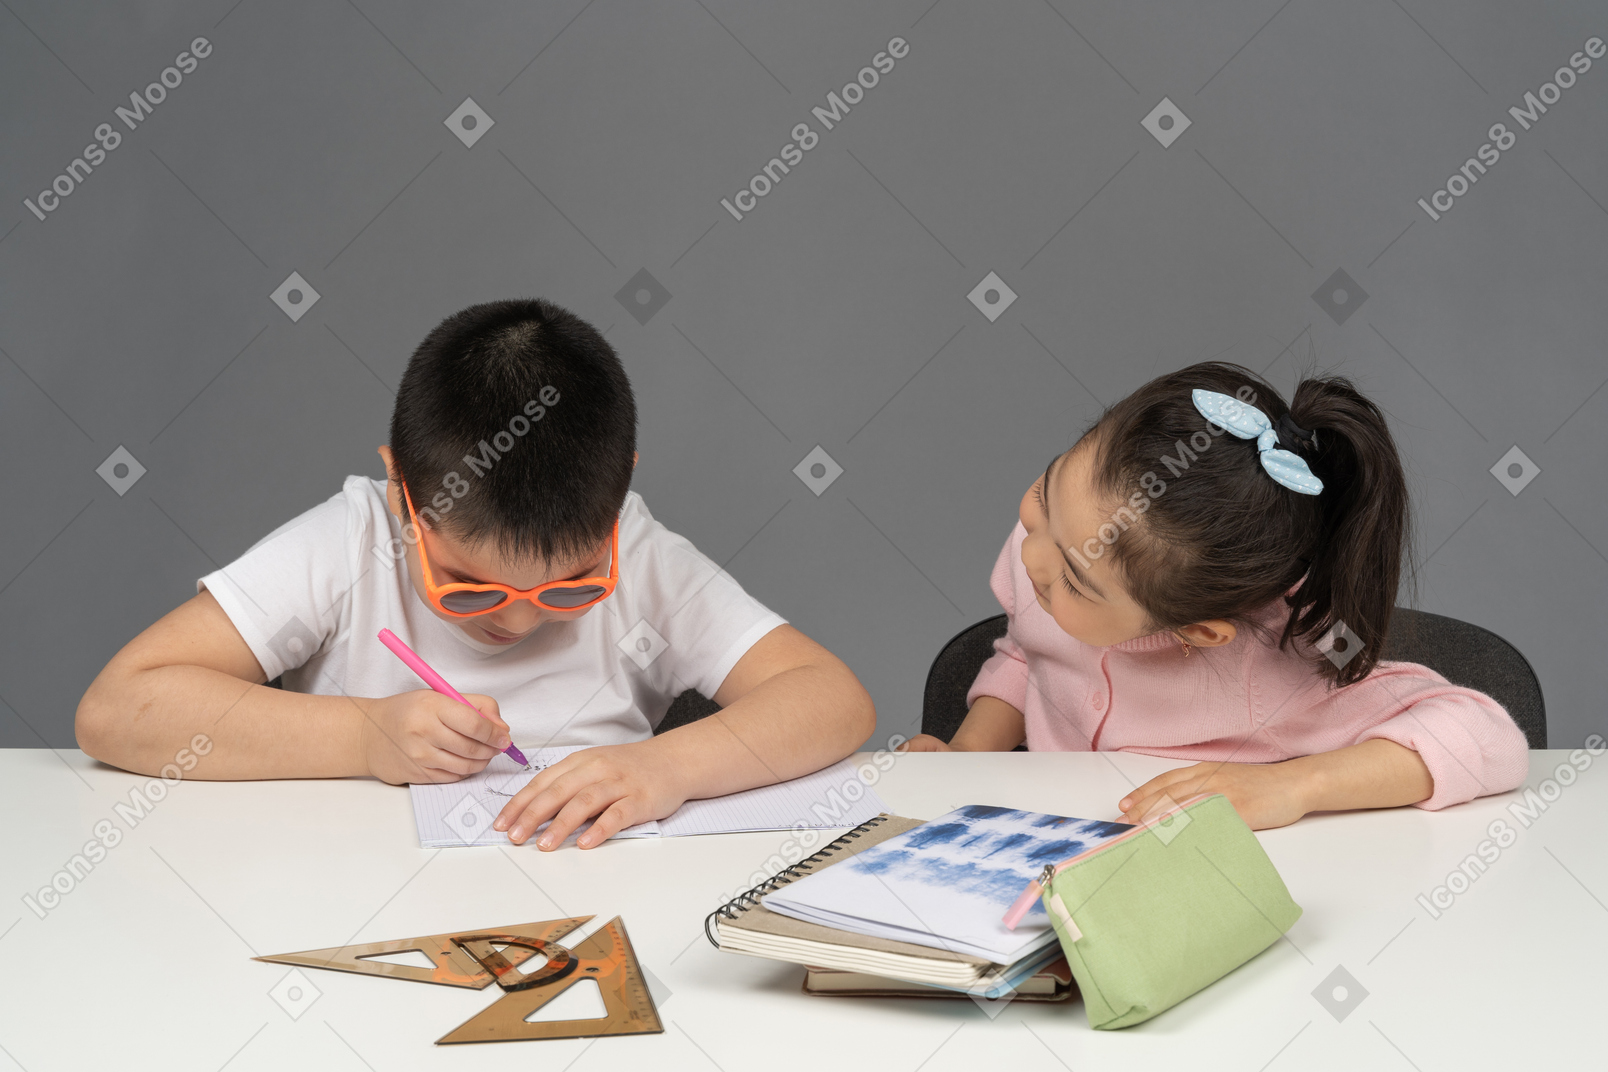 Boy in sunglasses doing homework next to his sister